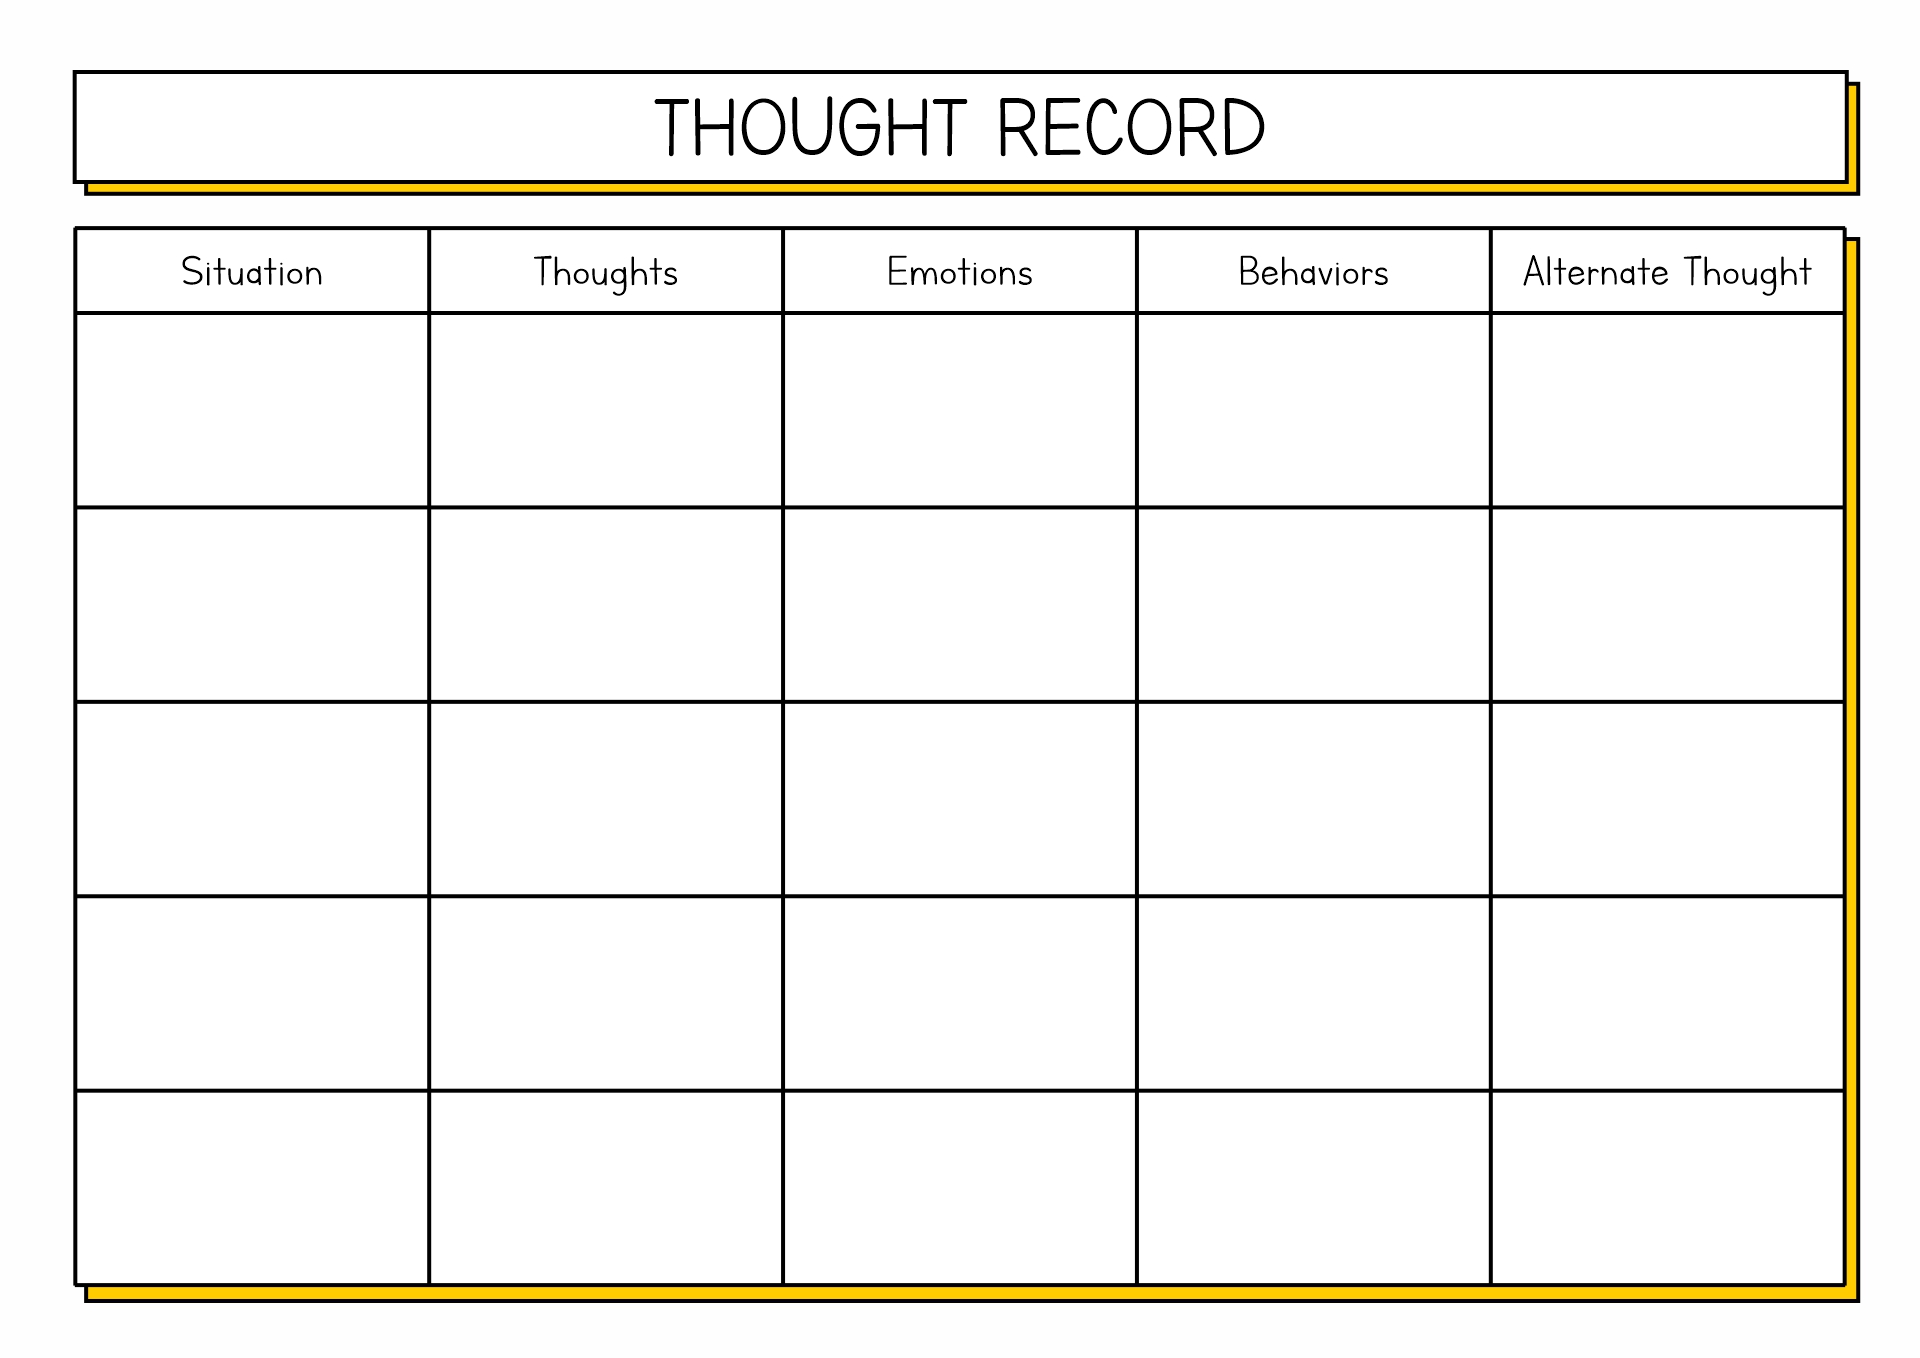 CBT Thought Record Worksheet Image